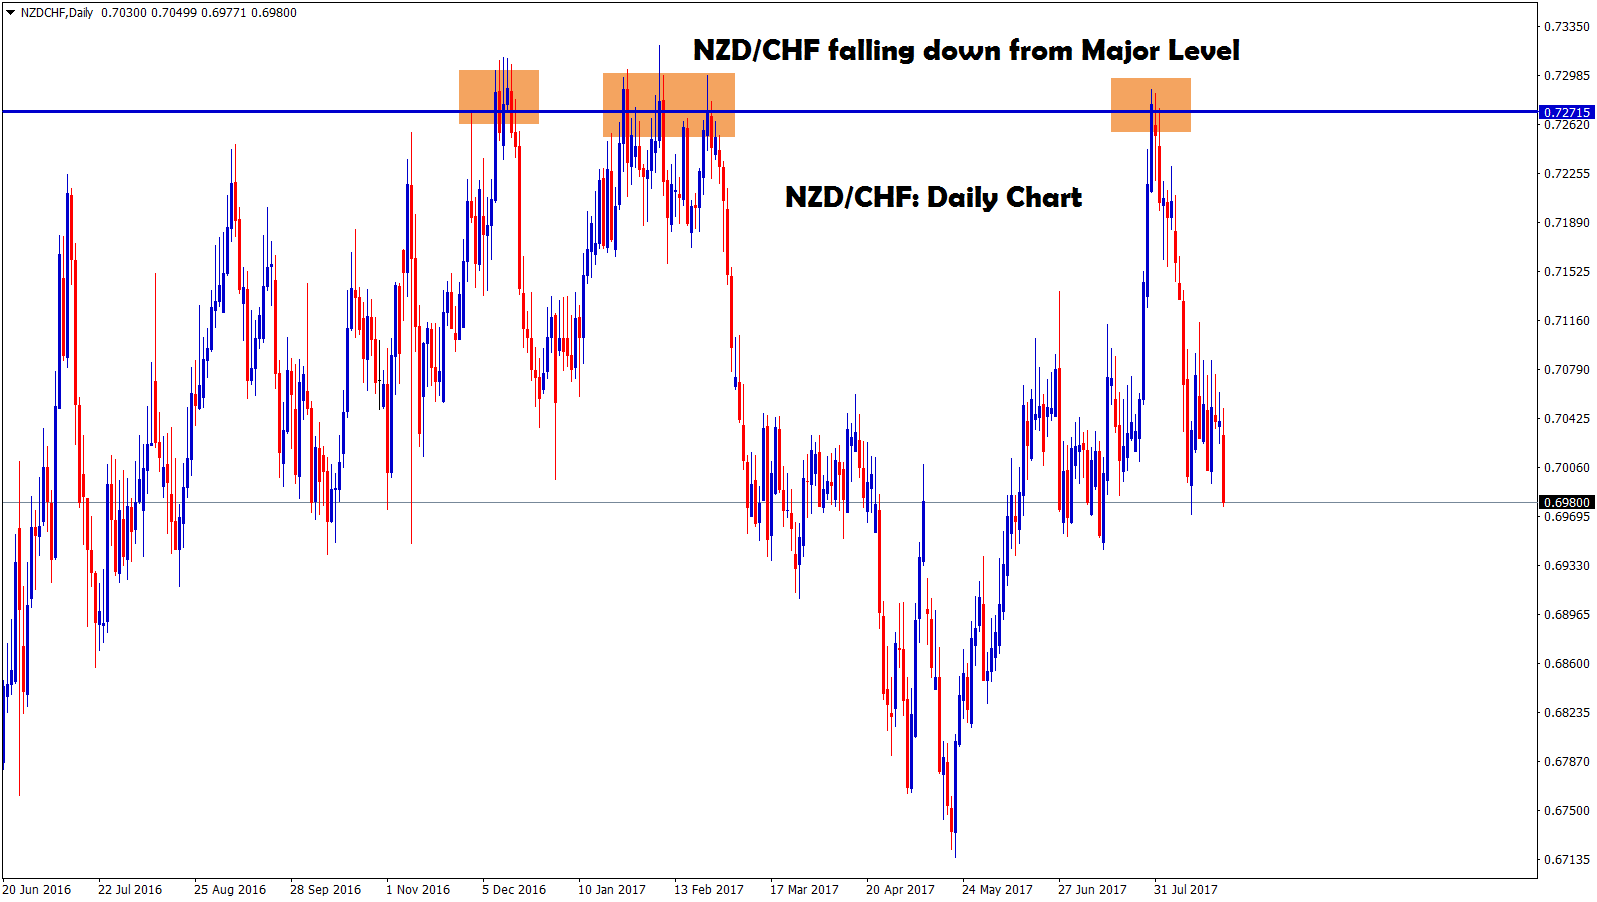 NZDCHF falling down from the major level in daily chart